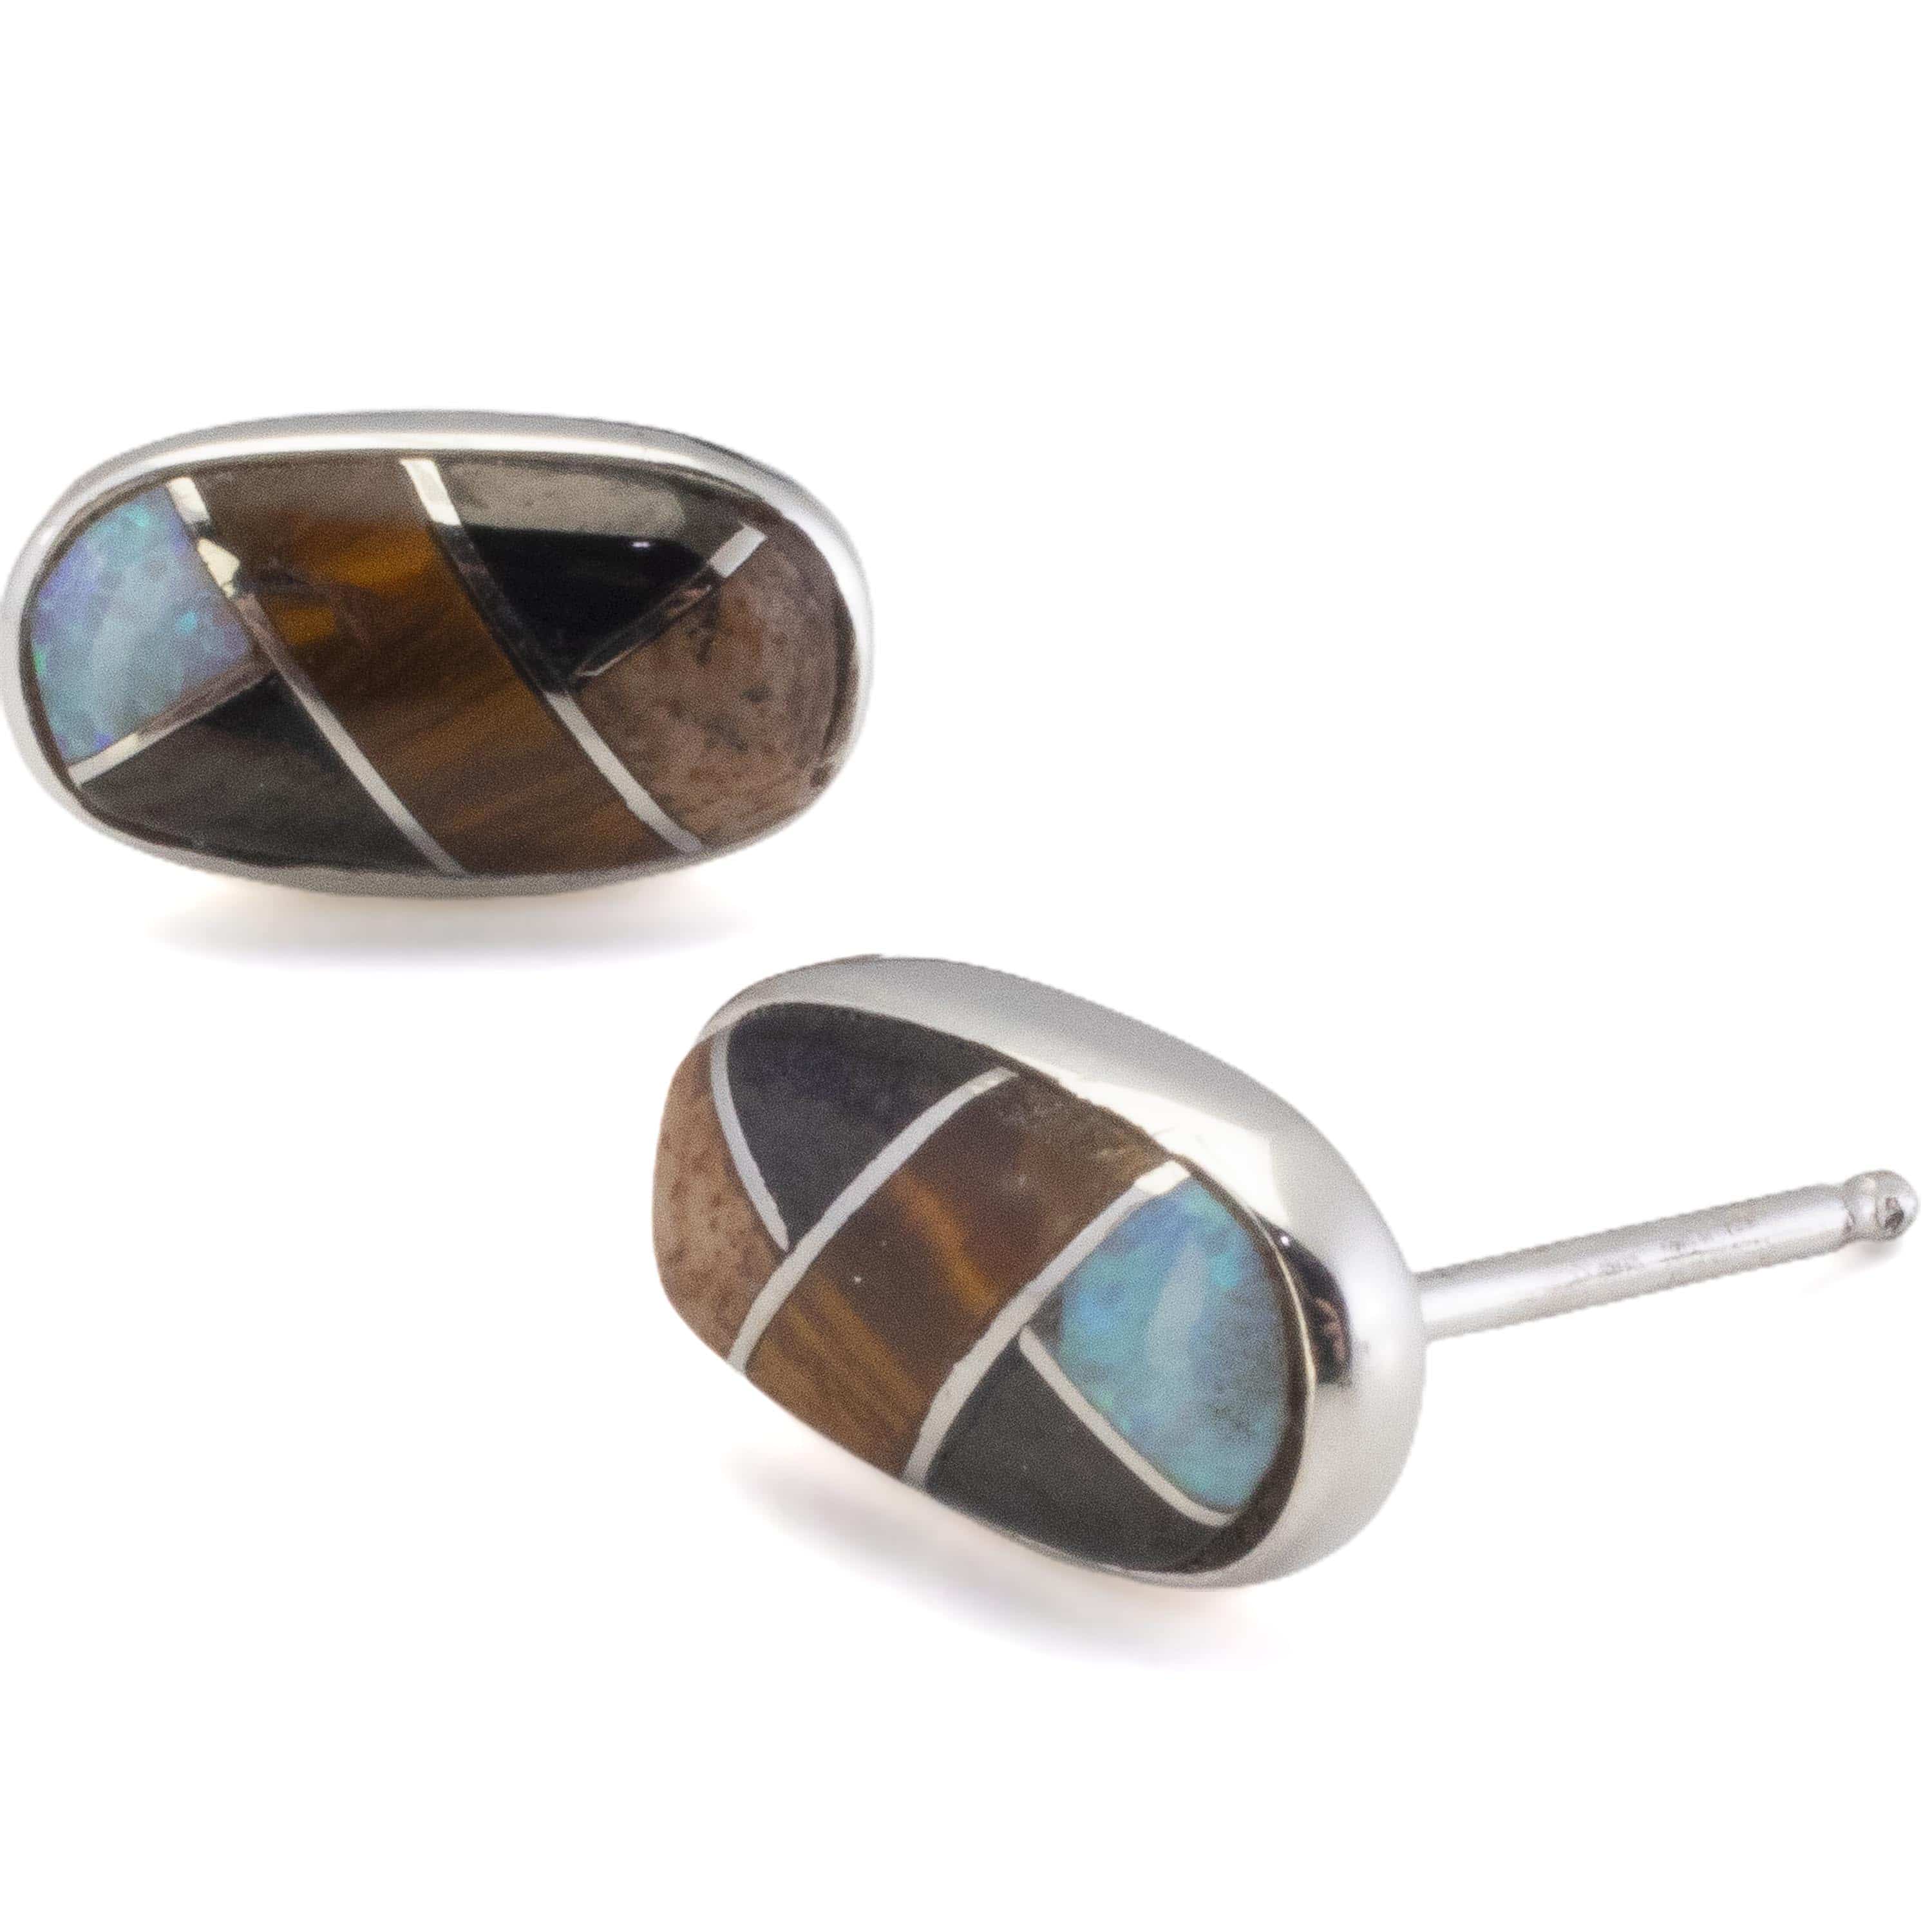 KALIFANO Southwest Silver Jewelry Tiger Eye Oval Sterling Silver Earrings with Stud Backing USA Handmade with Opal Accent NME.2238.TE